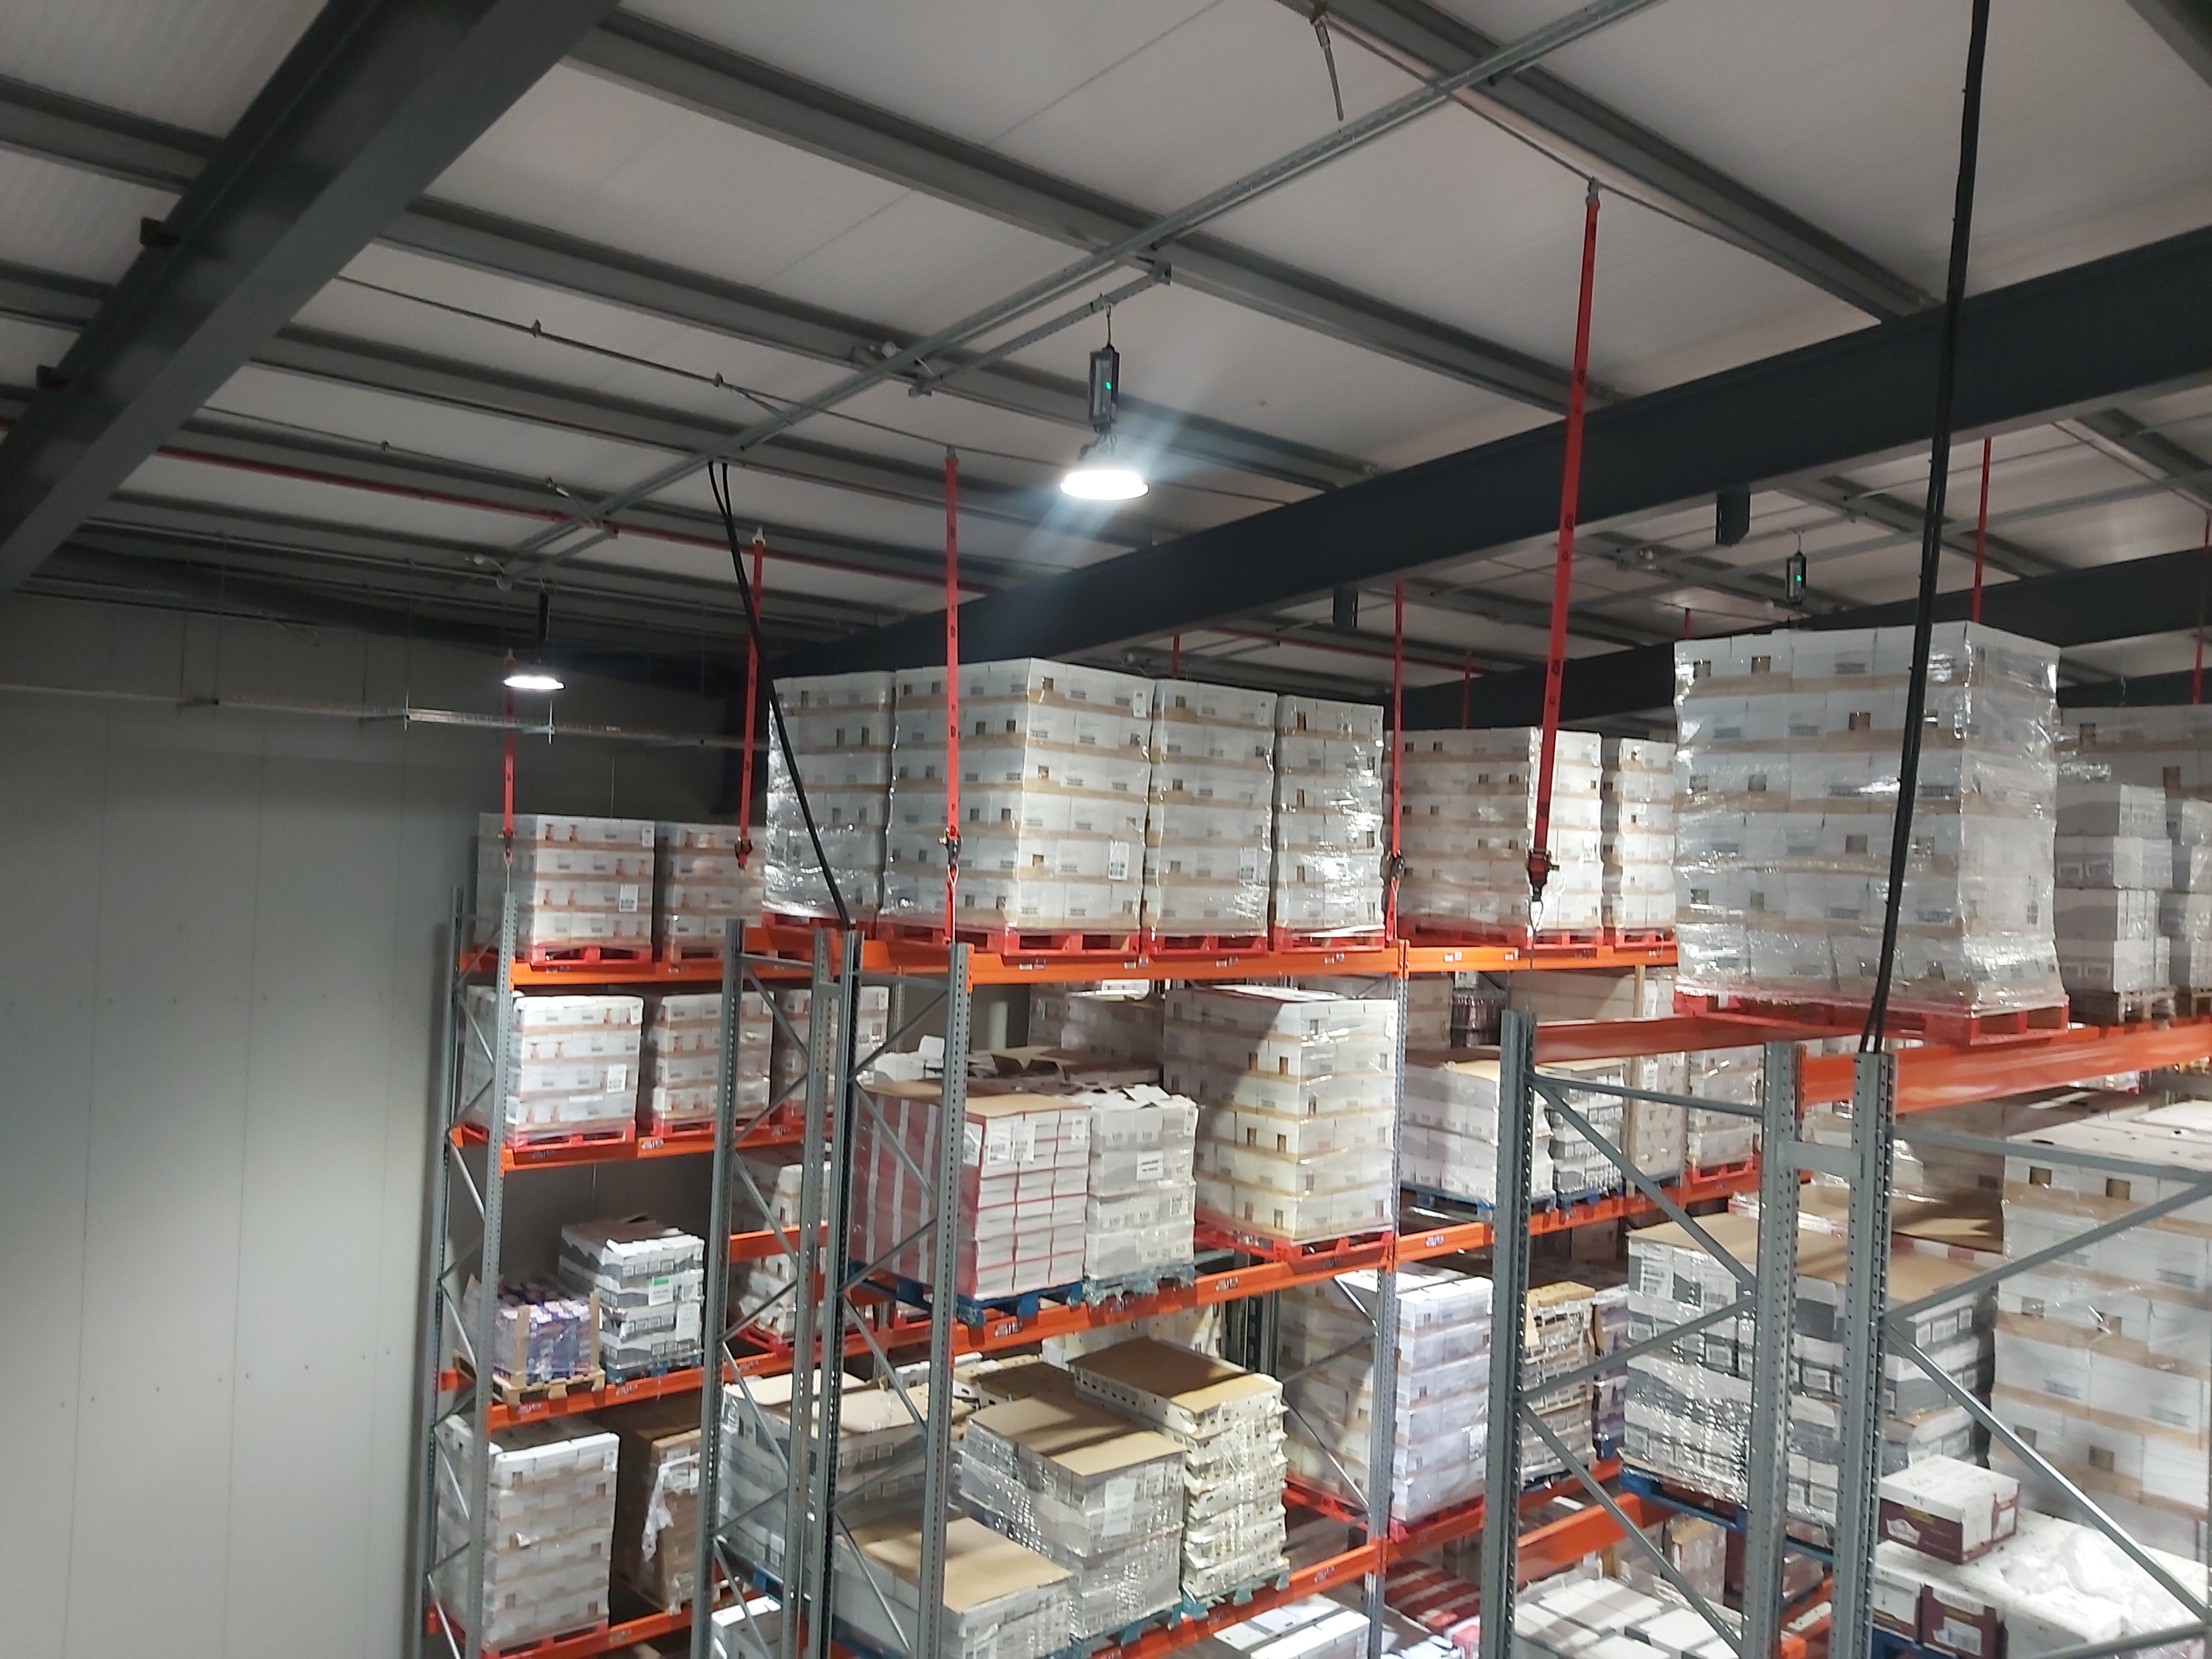 Chilled Store Installation Completed in Days by Rack Collapse Prevention